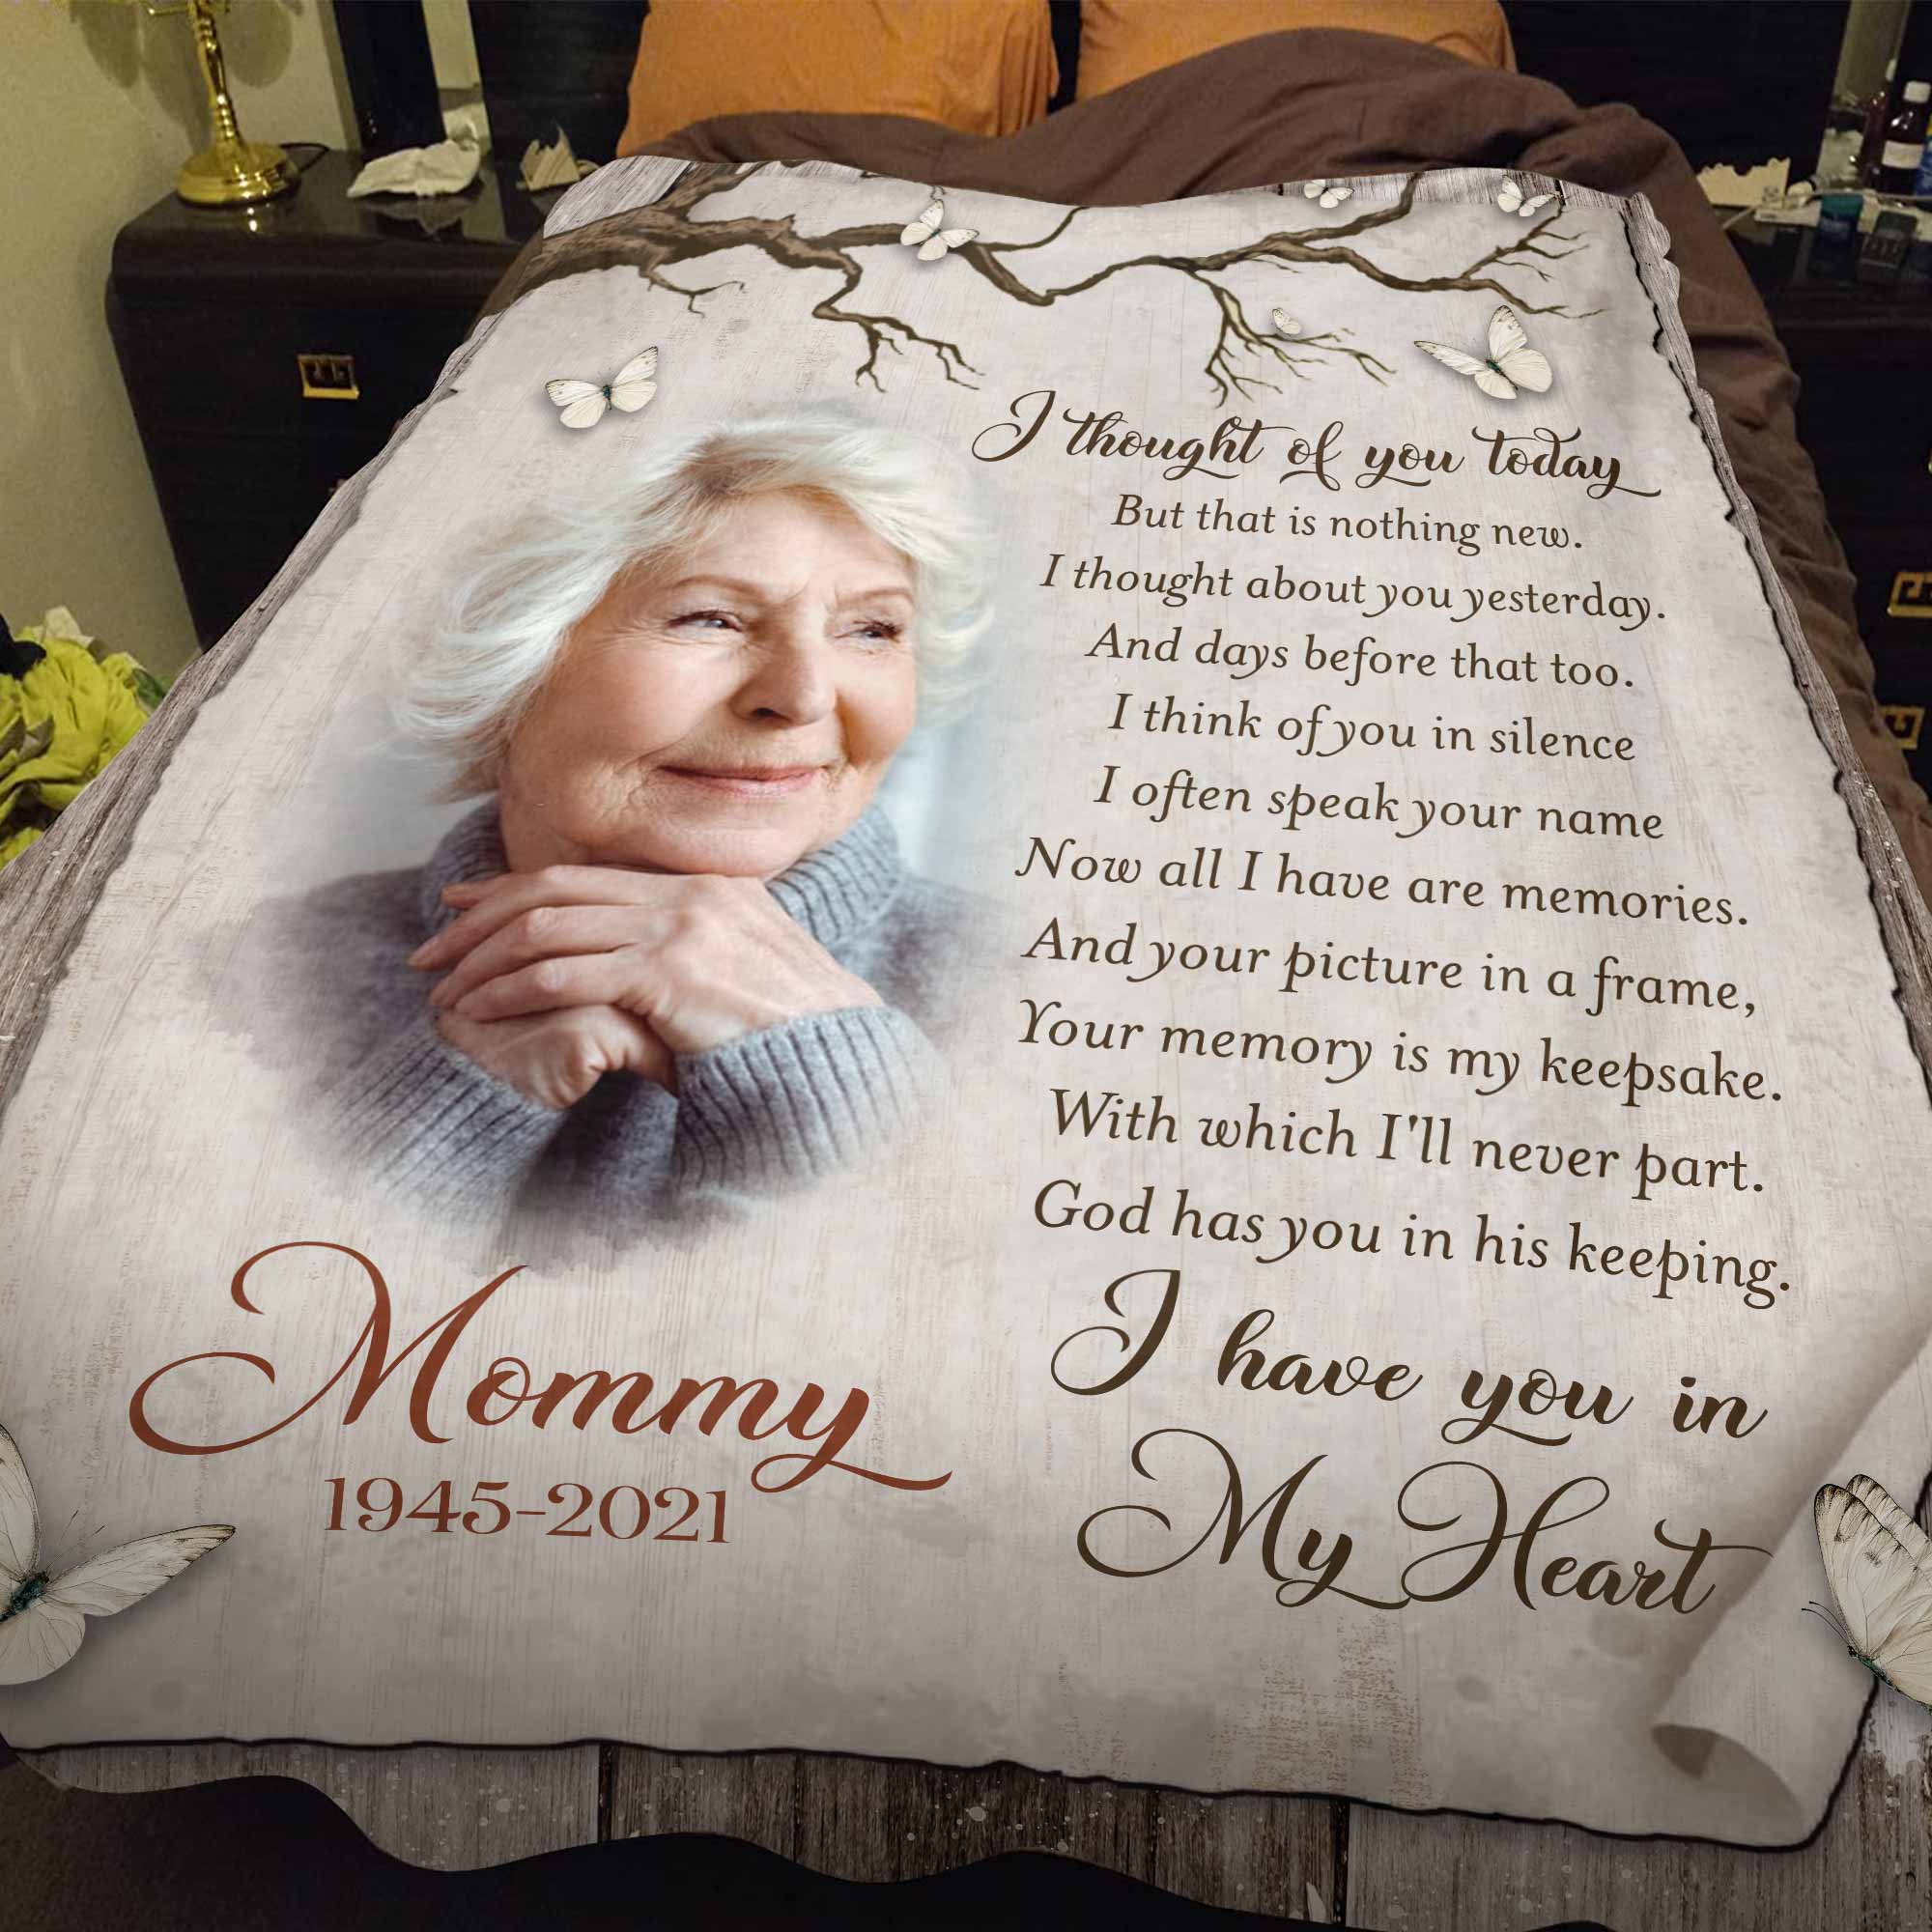 Memorial Butterfly Blankets For Loss Of Mother, In Loving Memory Blankets, Personalized Memory Blankets With Pictures, Funeral Blankets